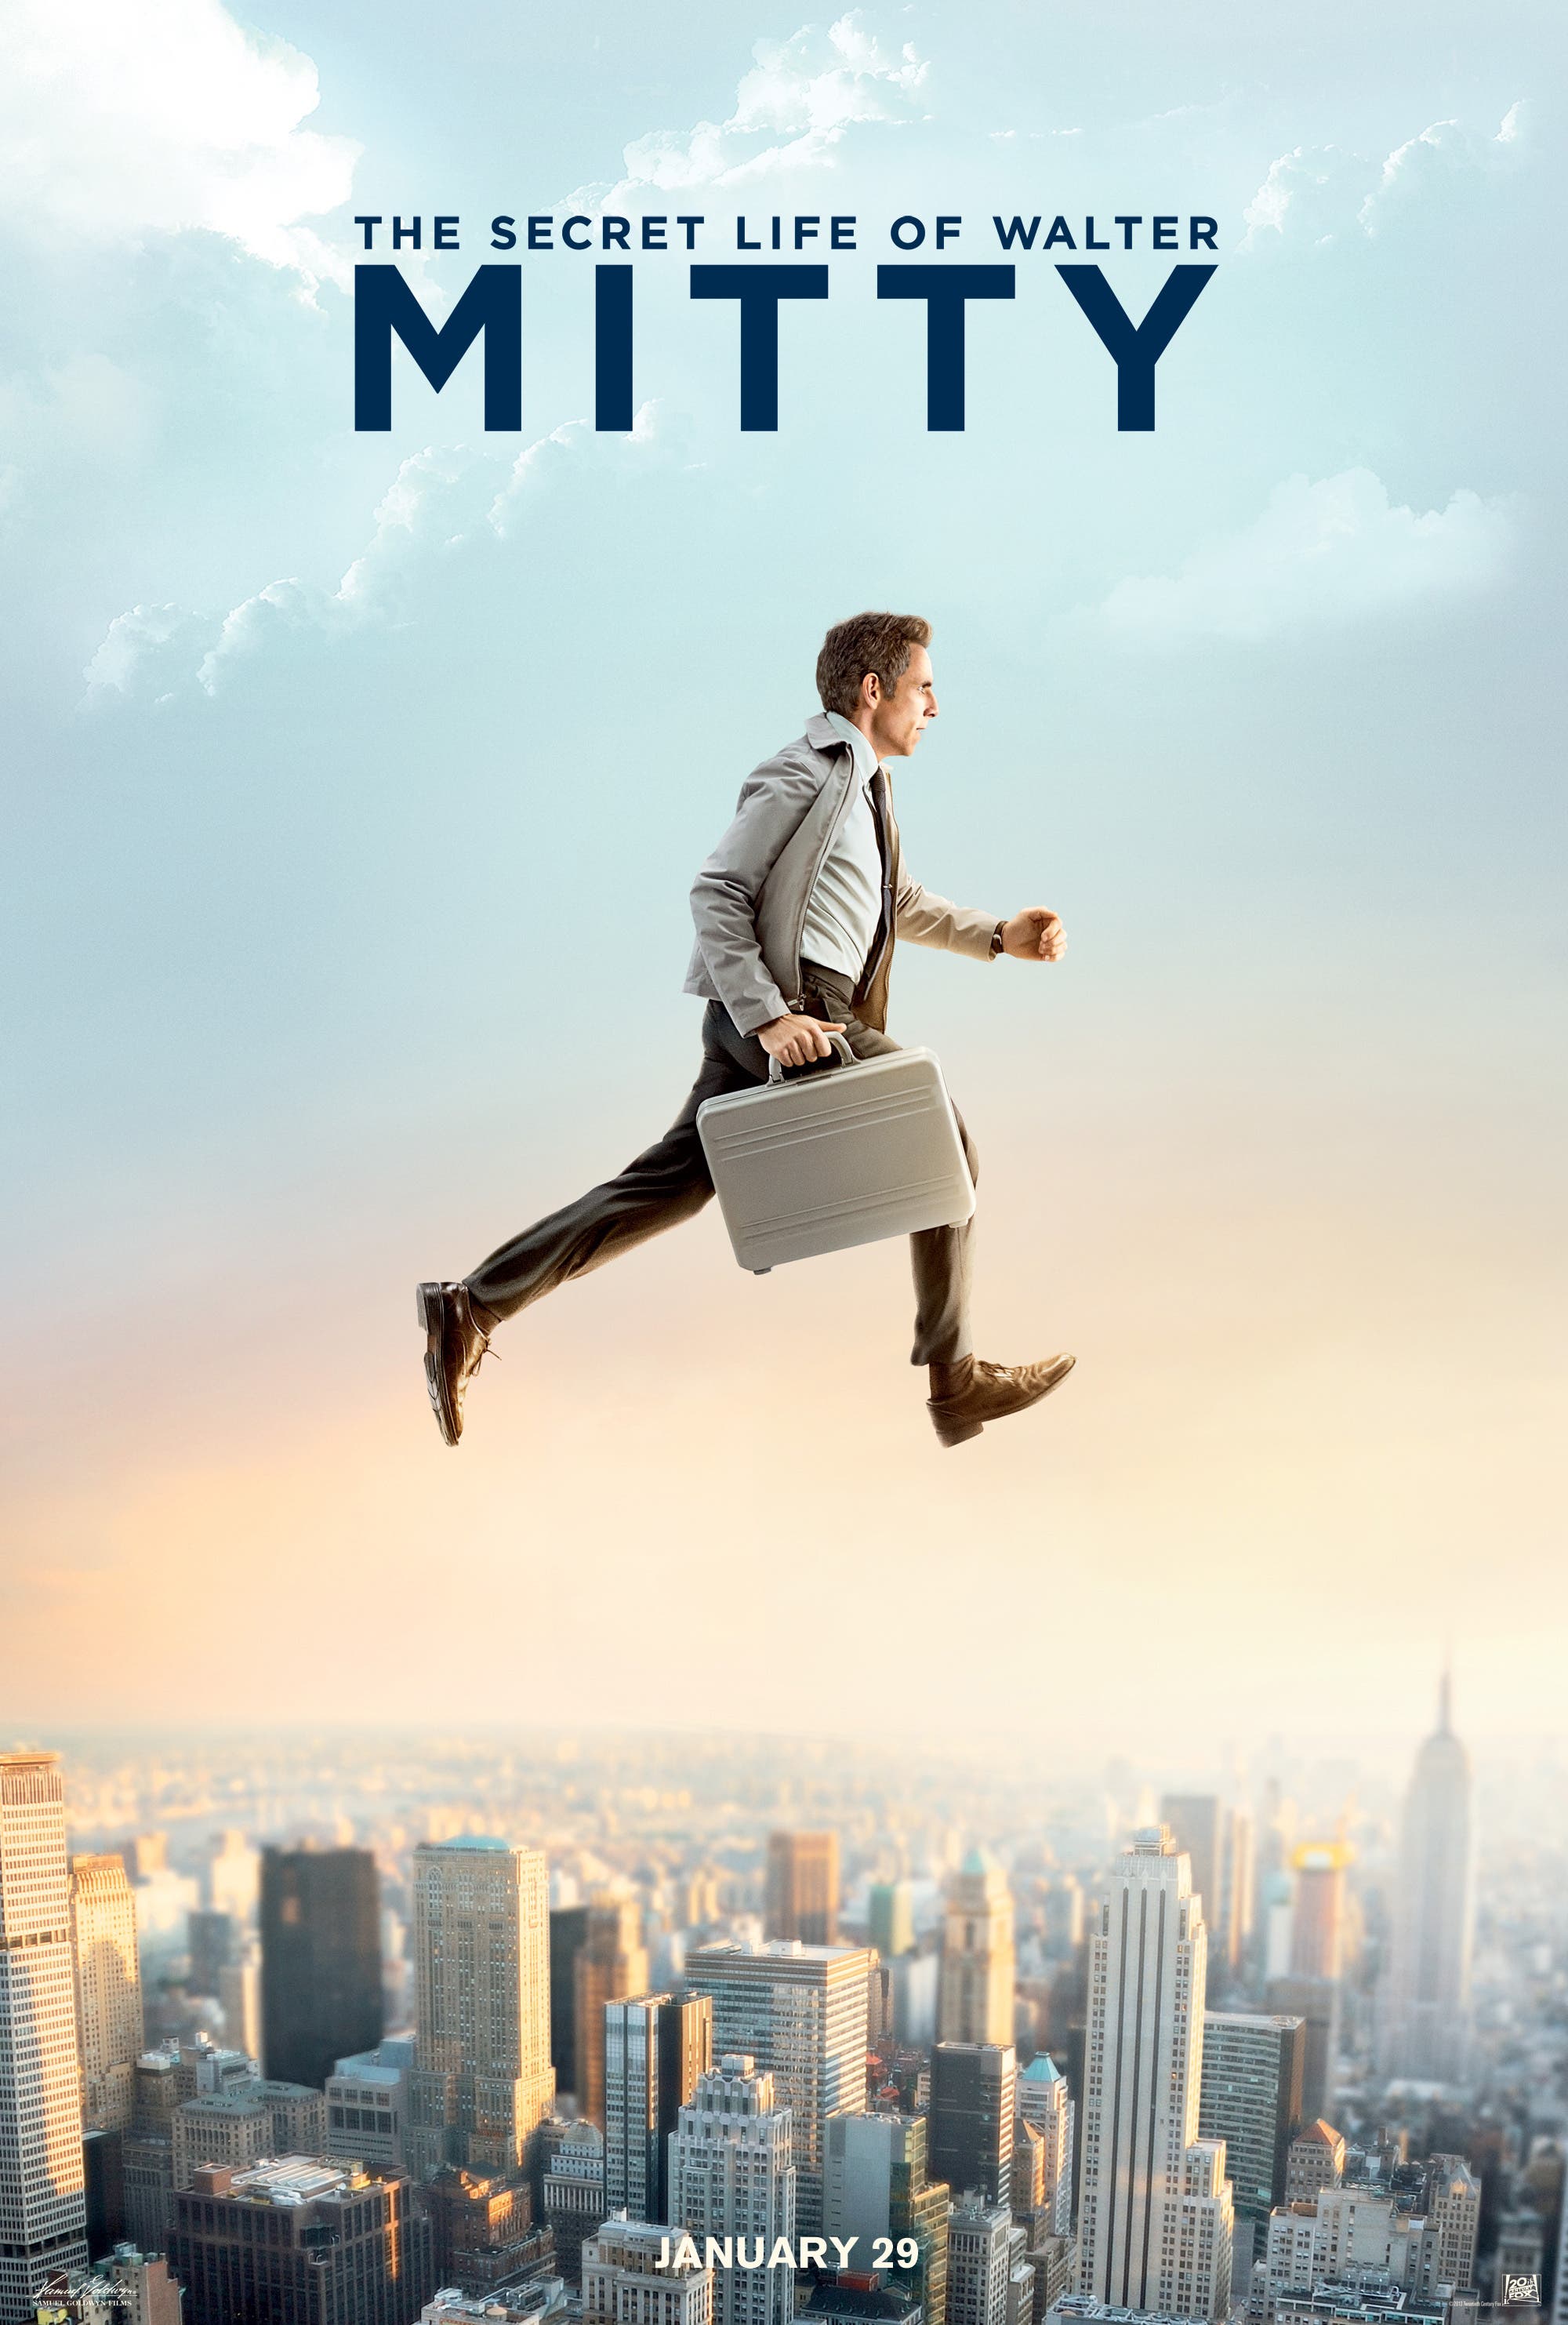 essay the secret life of walter mitty